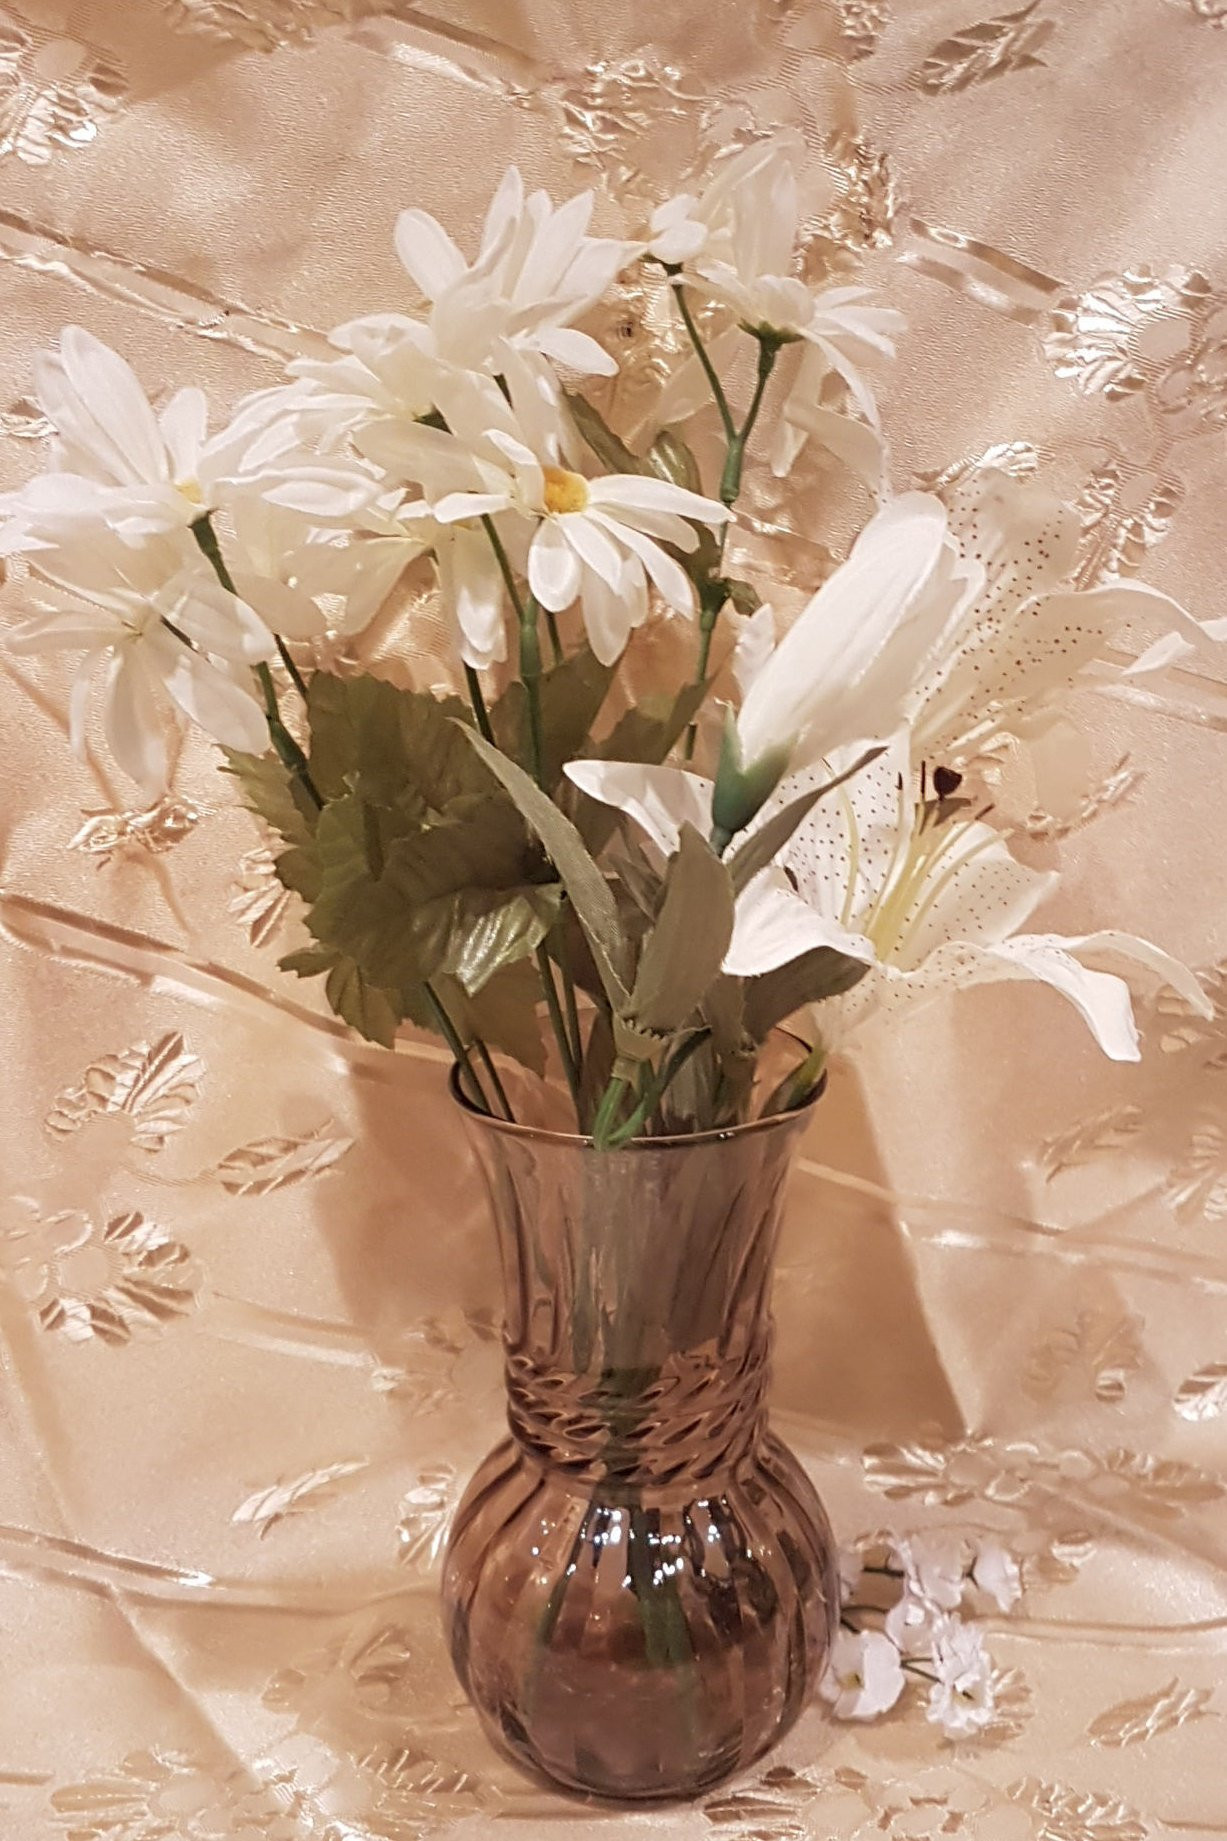 11 Great 2 Foot Tall Glass Vases 2024 free download 2 foot tall glass vases of anchor hocking vintage smoke brown optic swirl glass vase pertaining to il fullxfull 1478200881 4sau